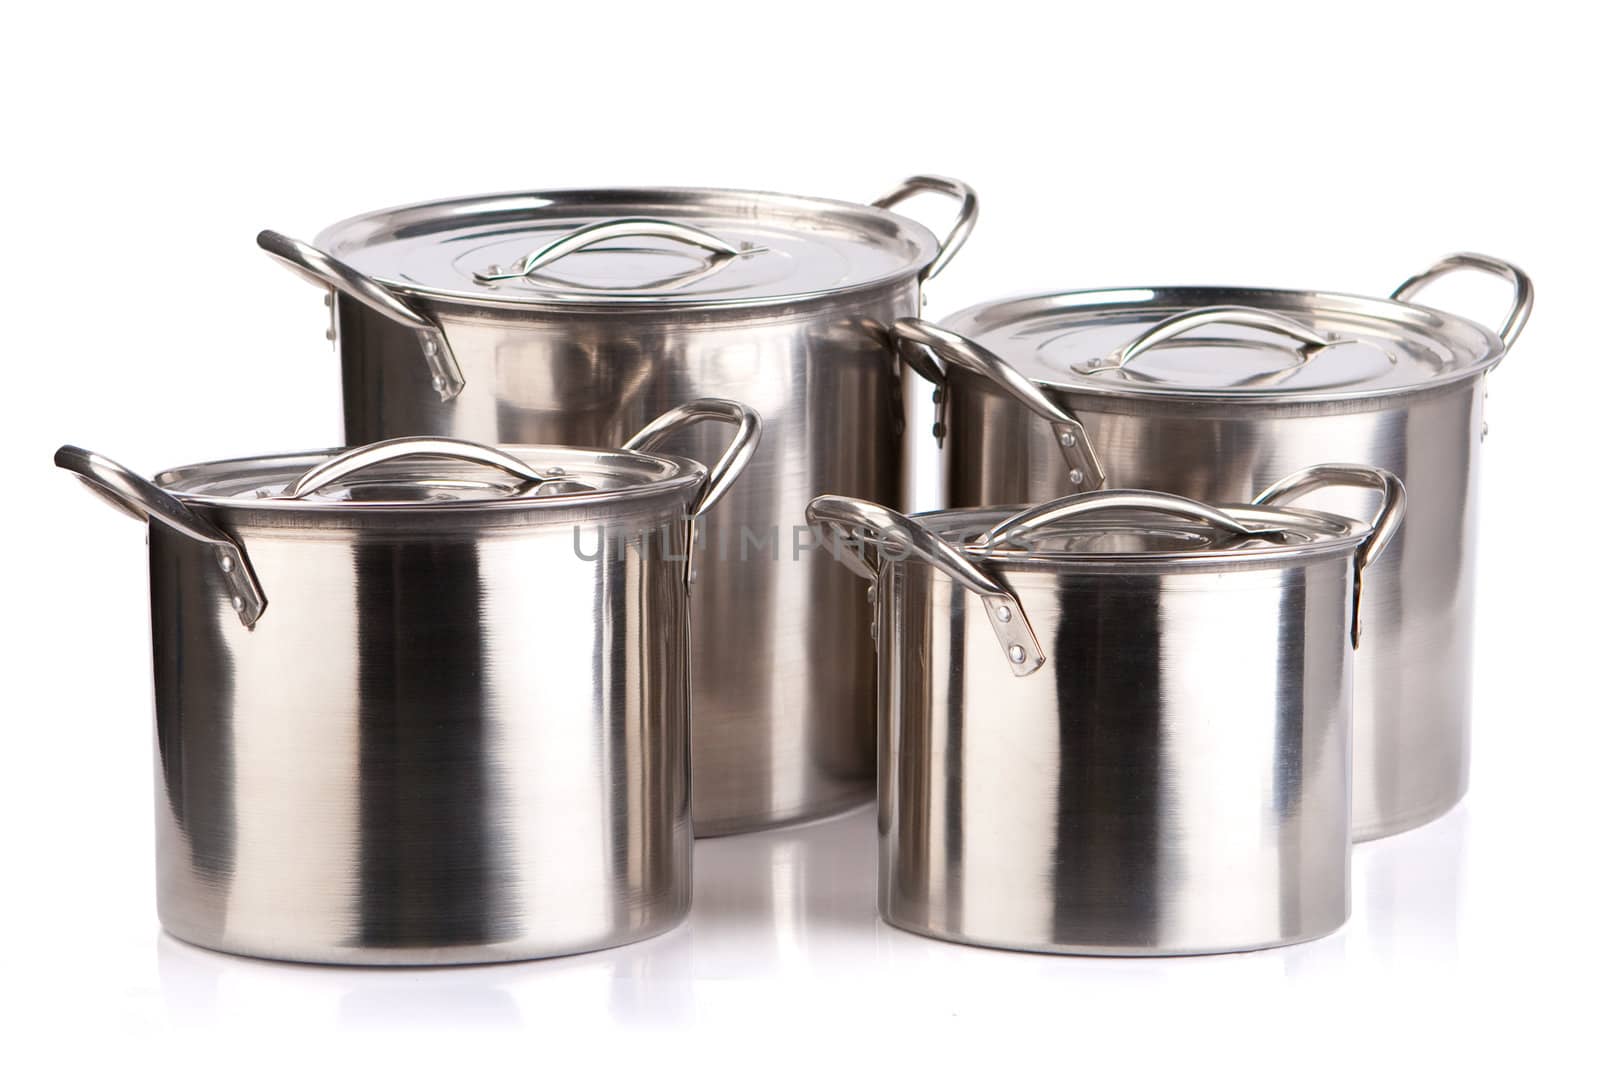 Stainless steel cooking pots by gilmanshin